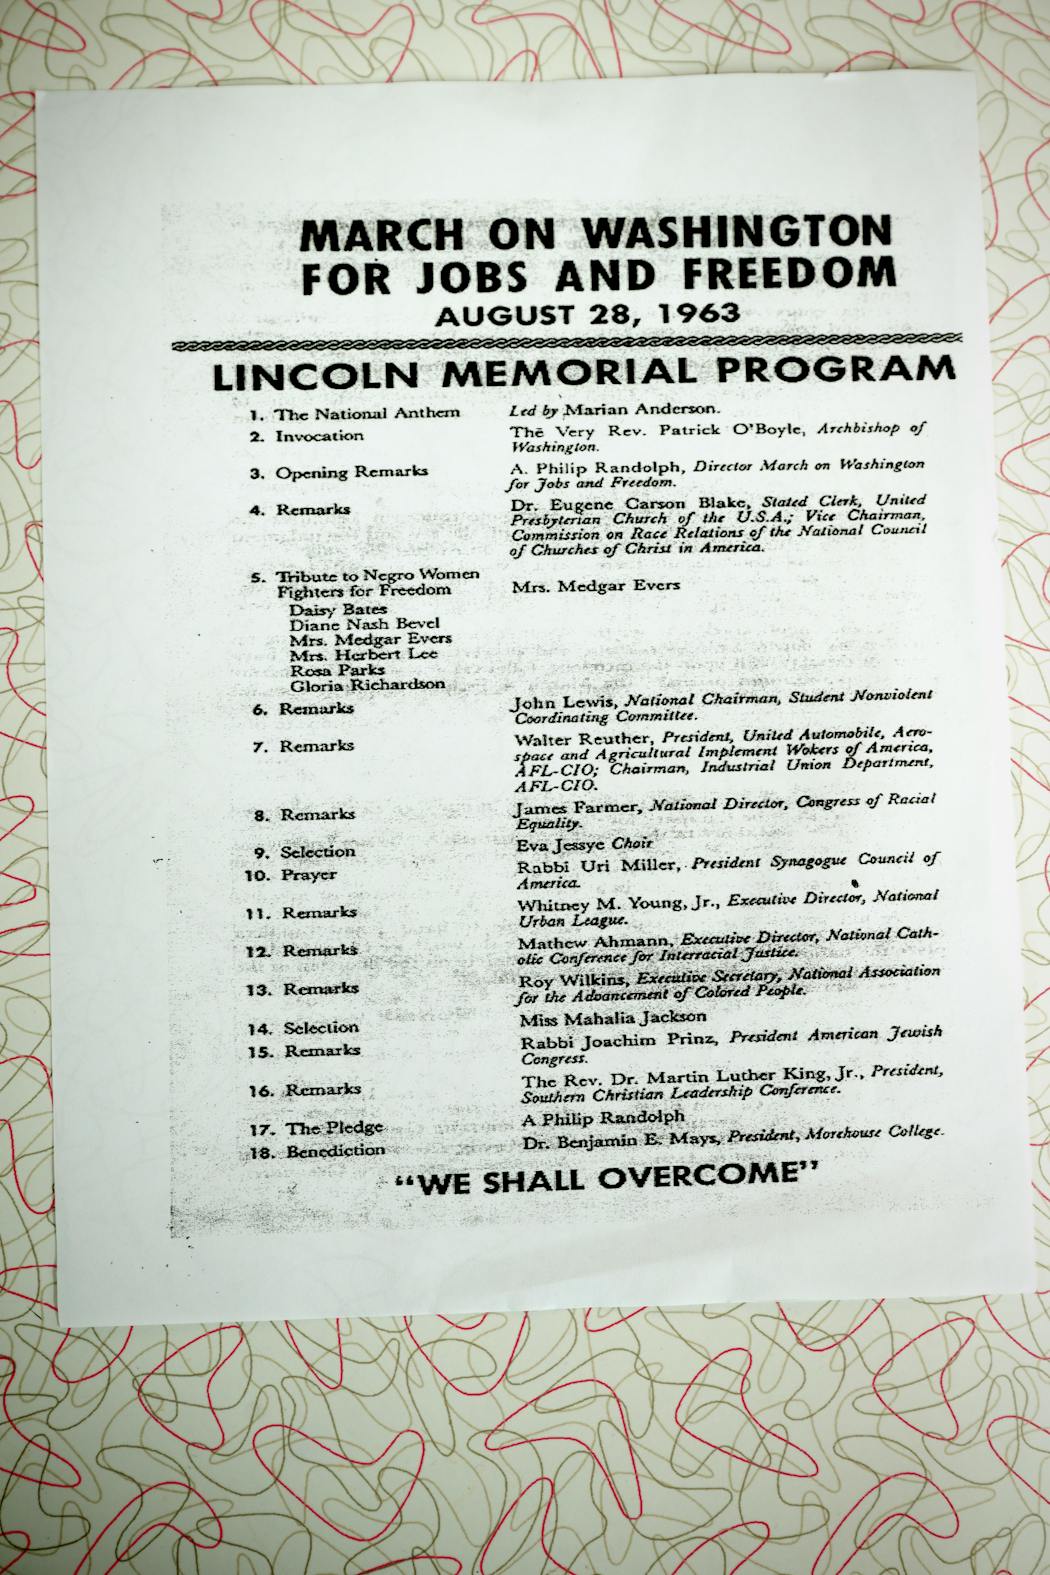 A copy of the program from the March on Washington.